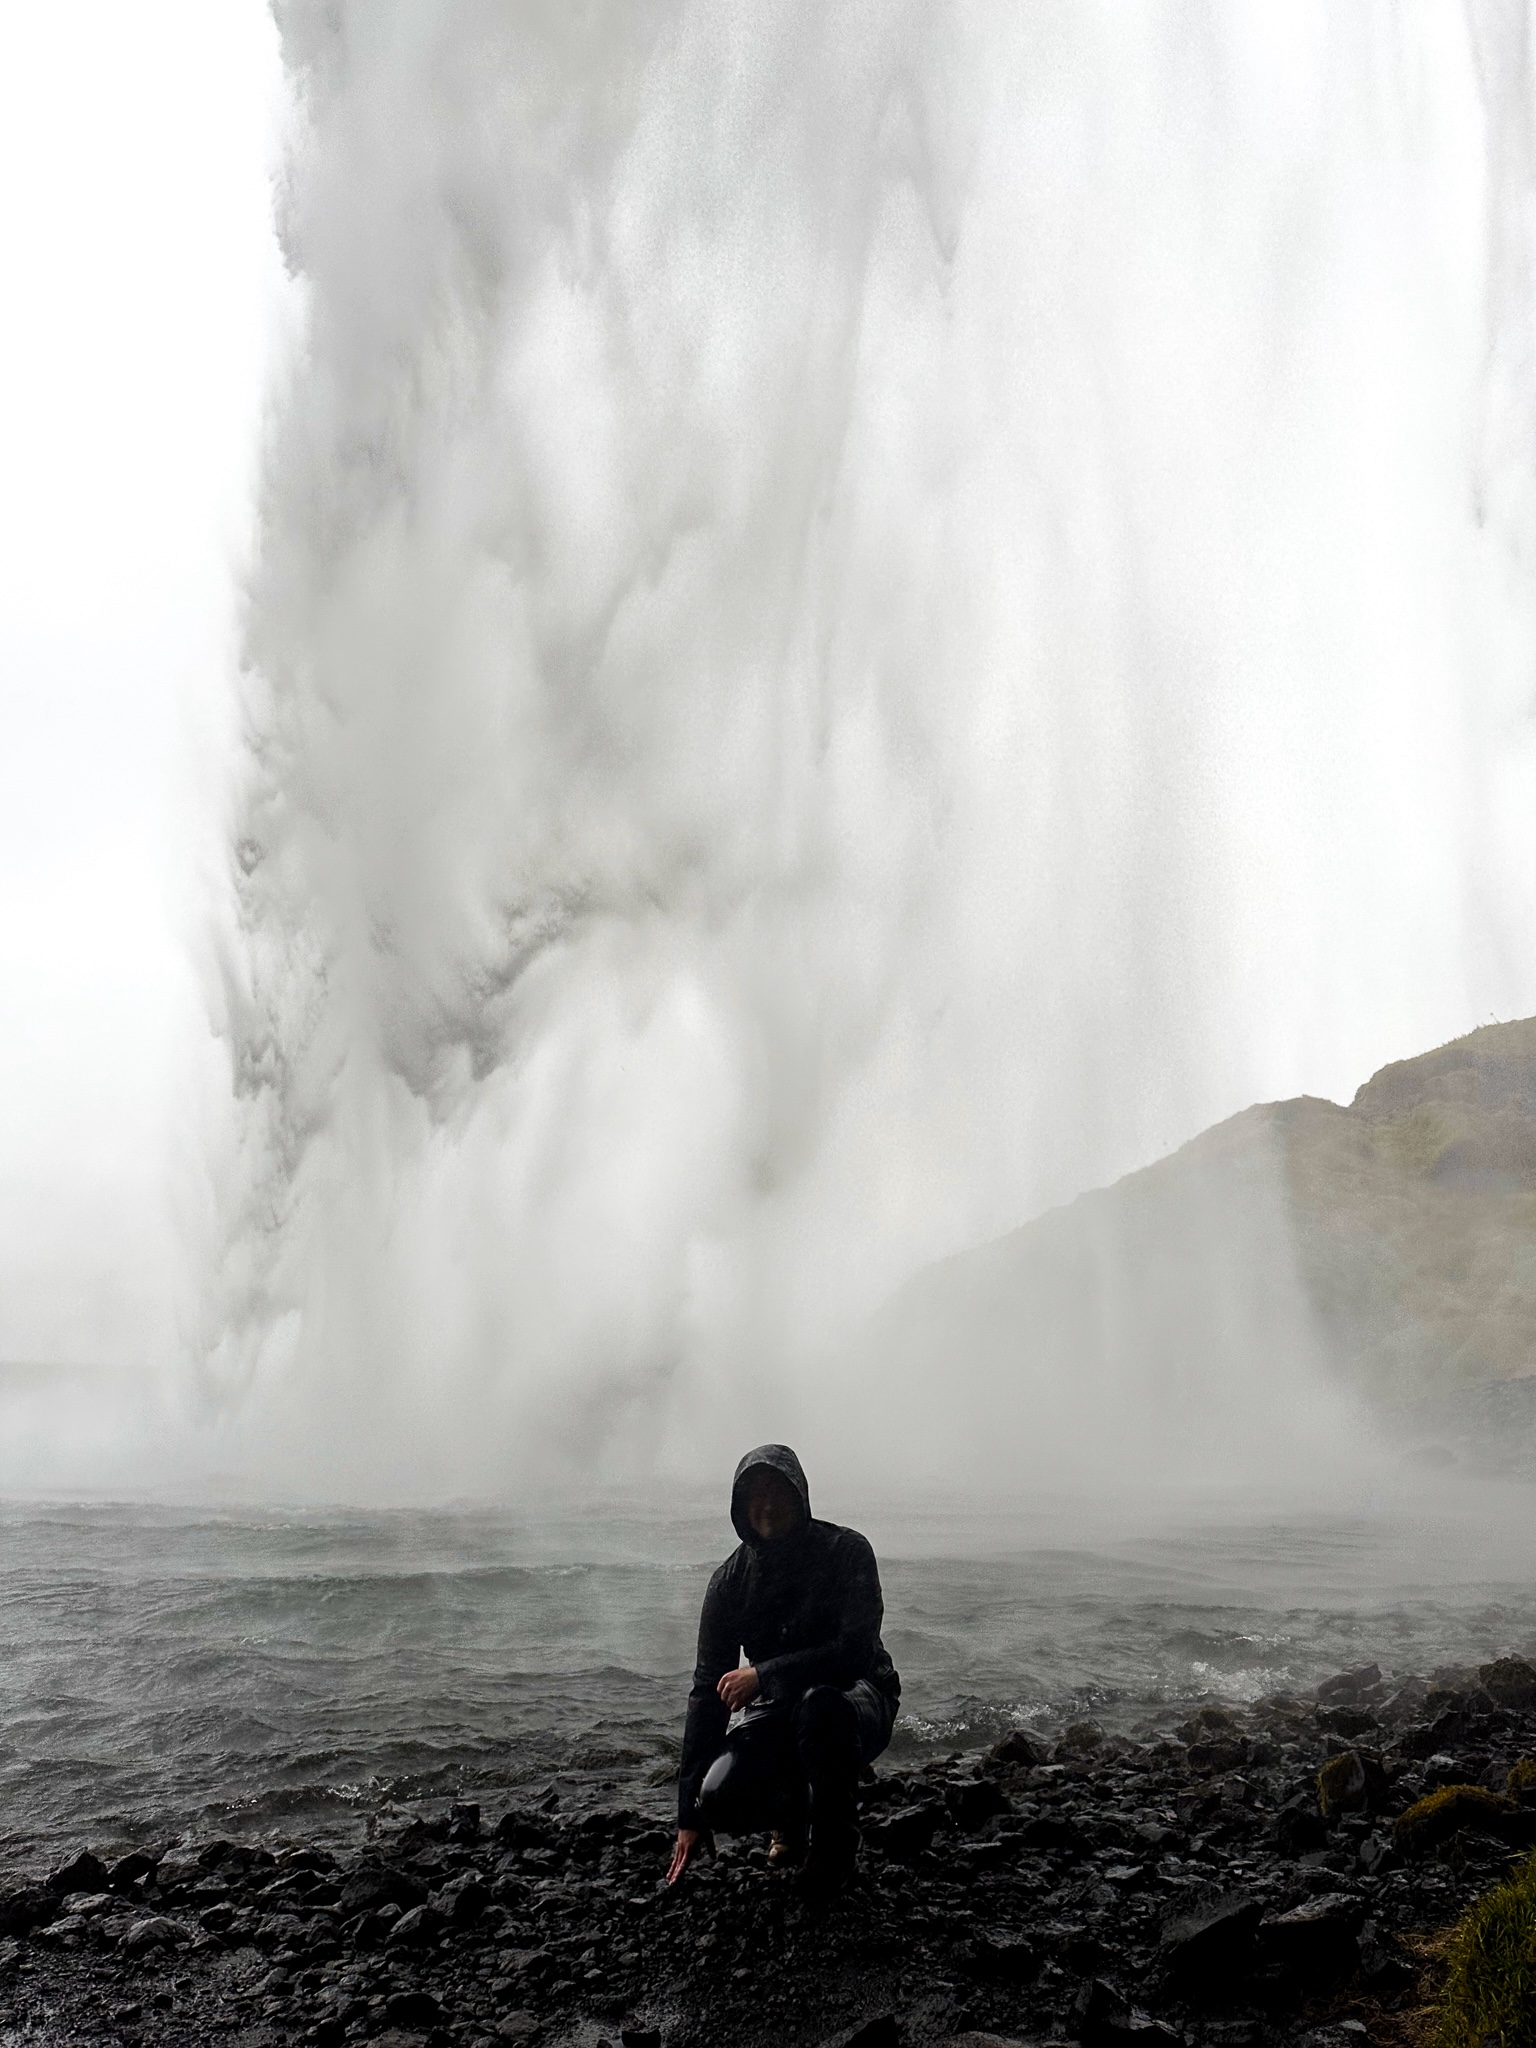 Simon kneels looking towards the camera, completely soaked with a wall of water from Seljalandsfoss pouring behind him